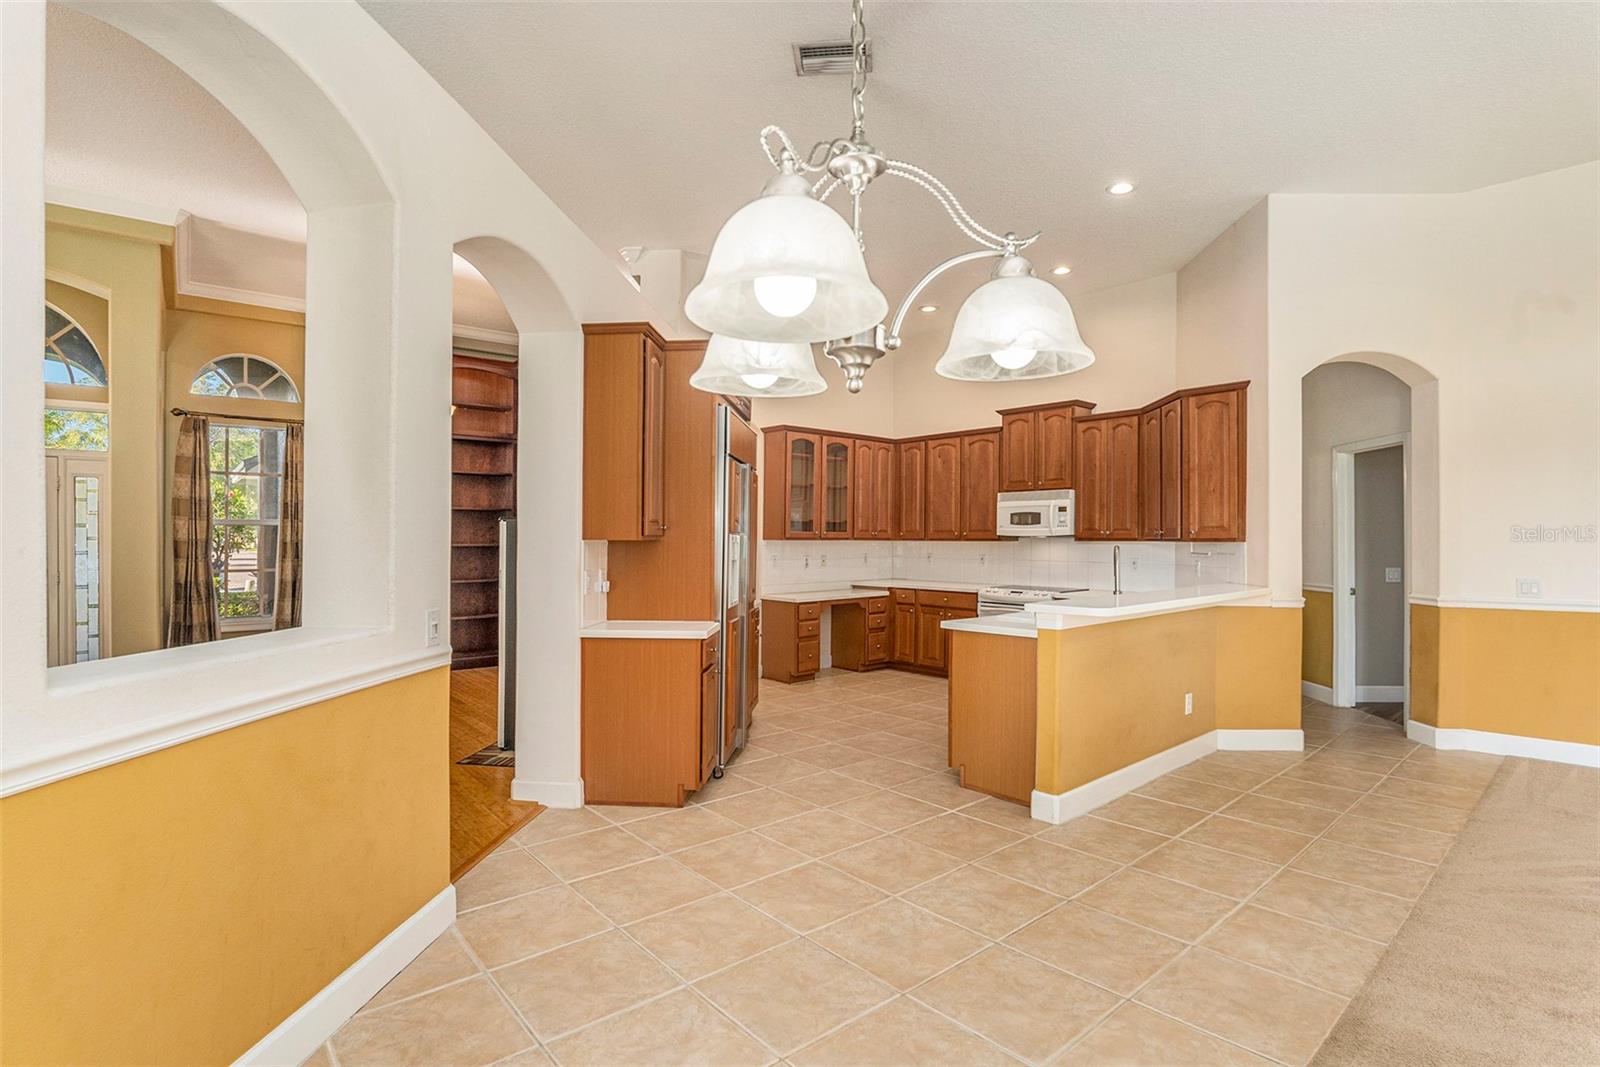 The spacious kitchen is the heart of this open and airy floor plan